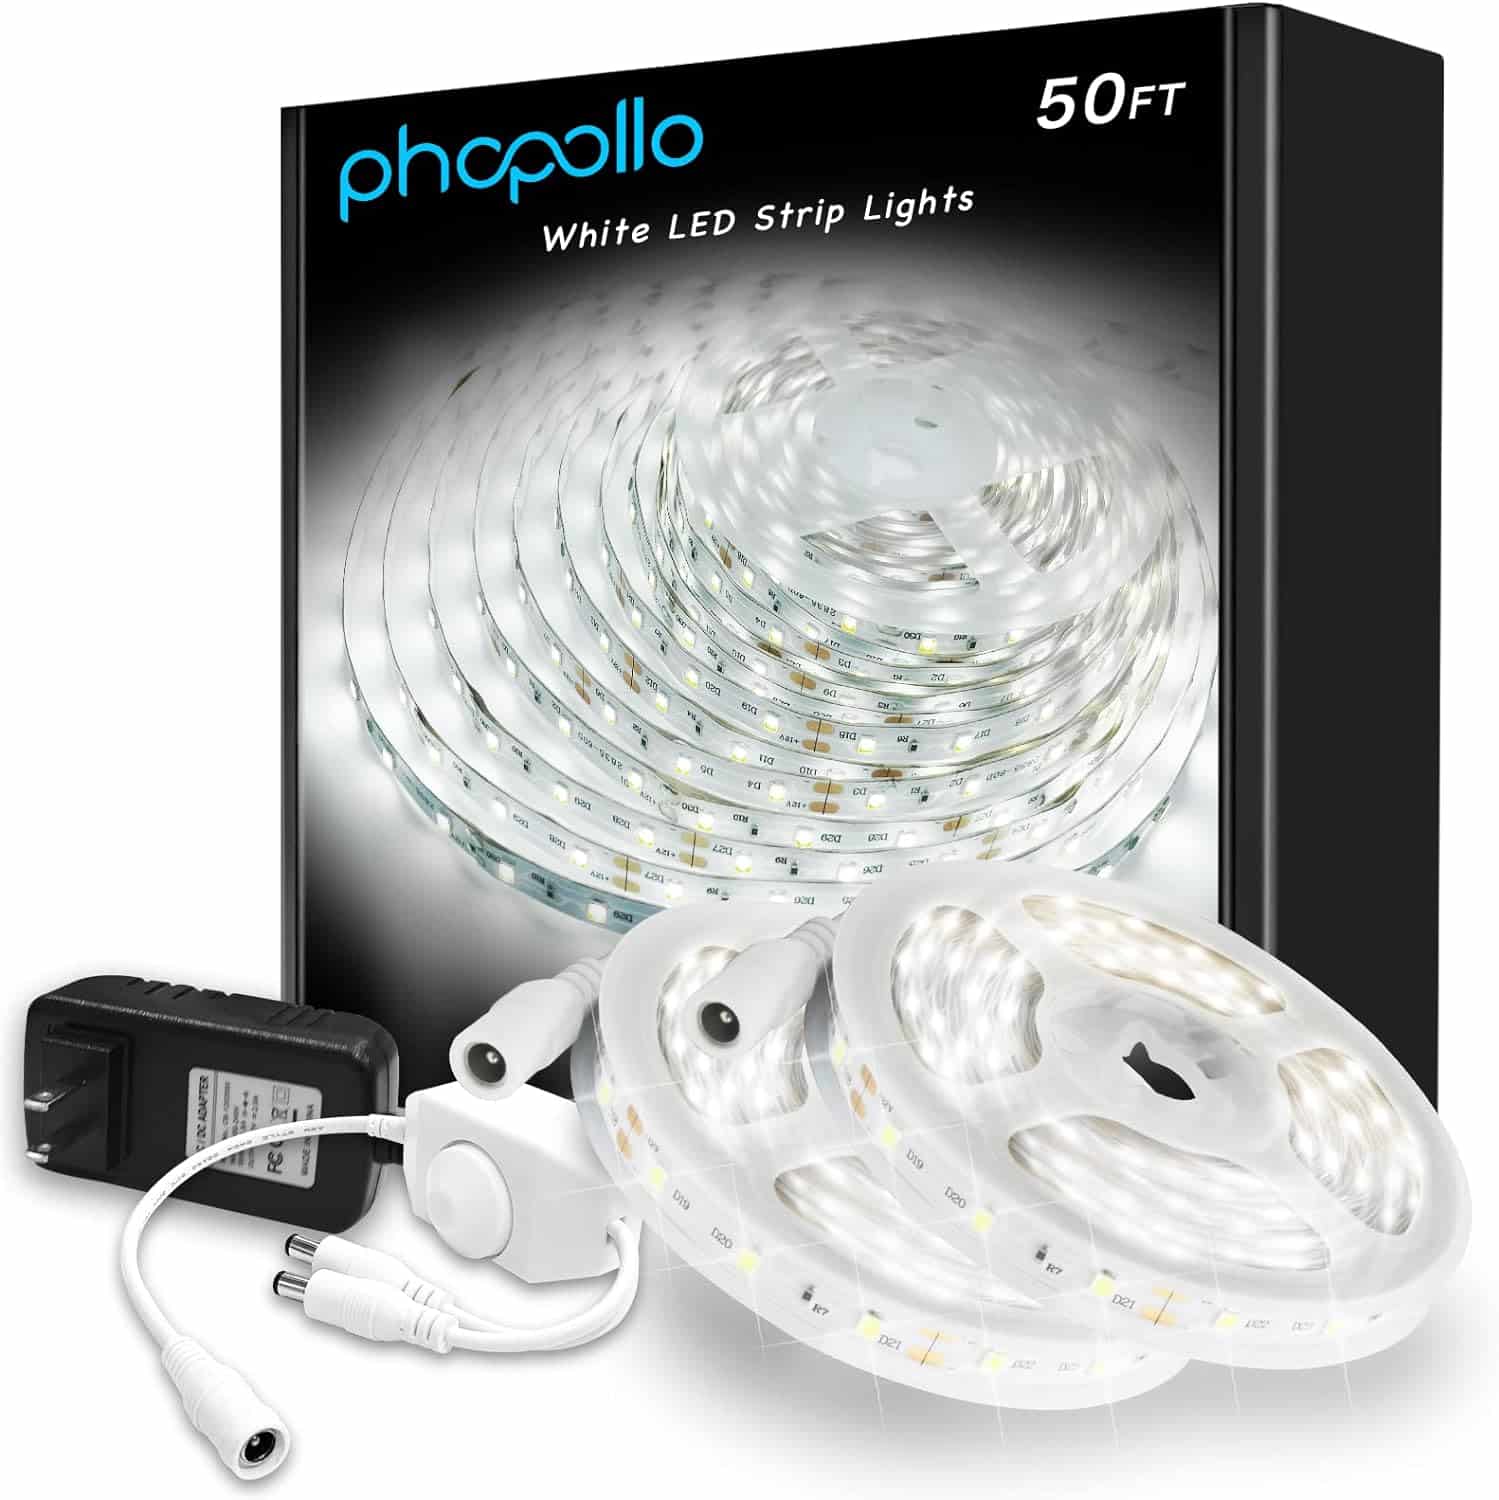 phopollo White LED Strip Lights, 50ft Dimmable 6500k Daylight White Led Light Strip, 900 LEDs Flexible Led Lights for Bedroom, Mirror, Kitchen Decoration